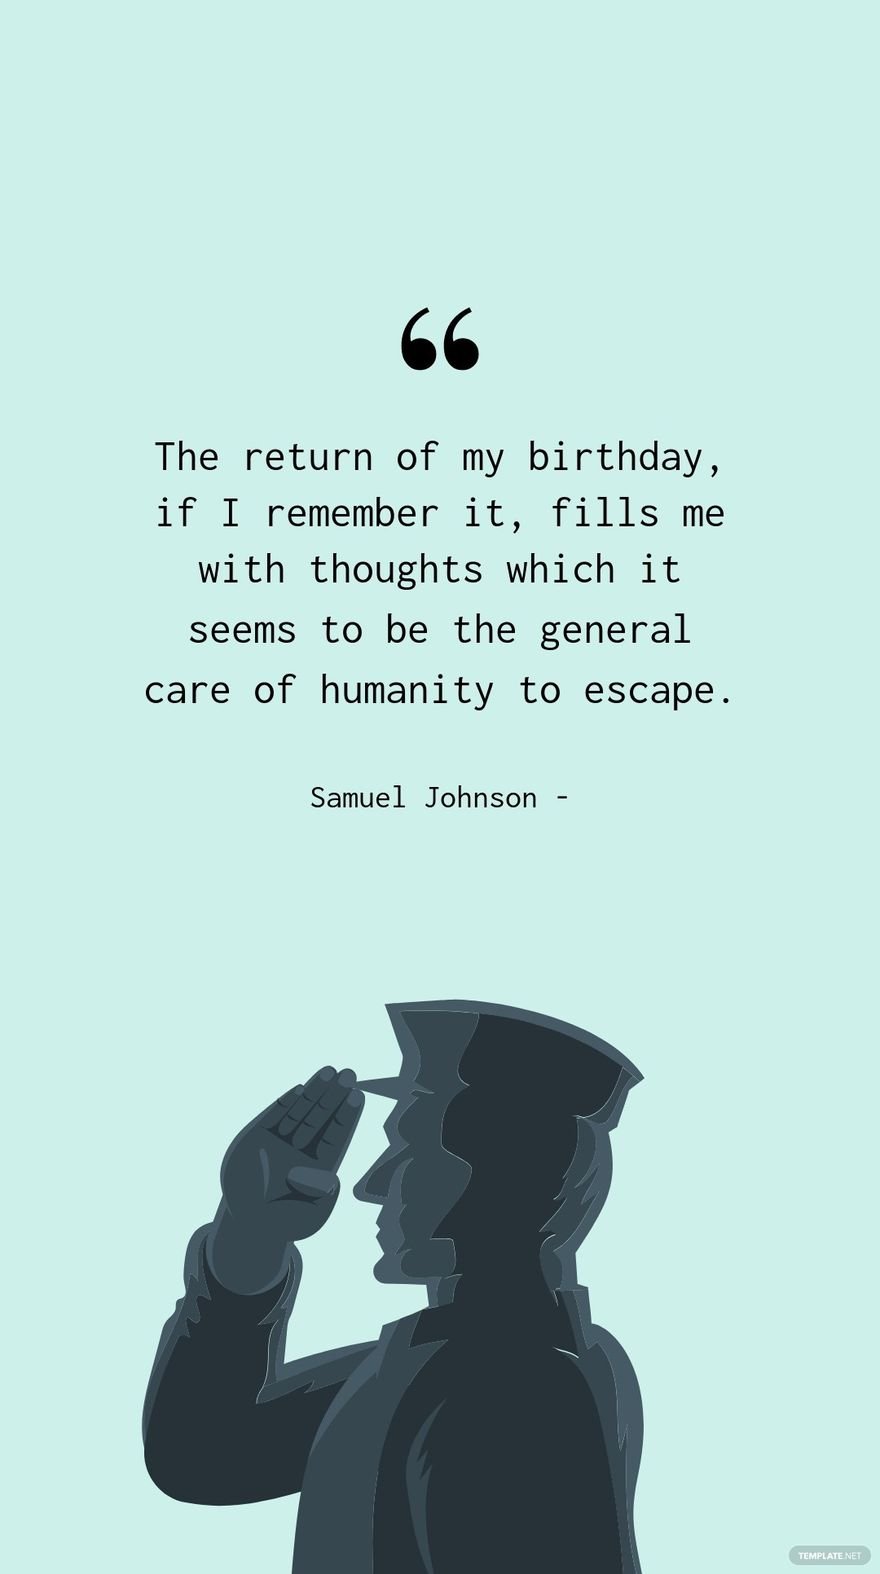 Samuel Johnson - The return of my birthday, if I remember it, fills me with thoughts which it seems to be the general care of humanity to escape. in JPG